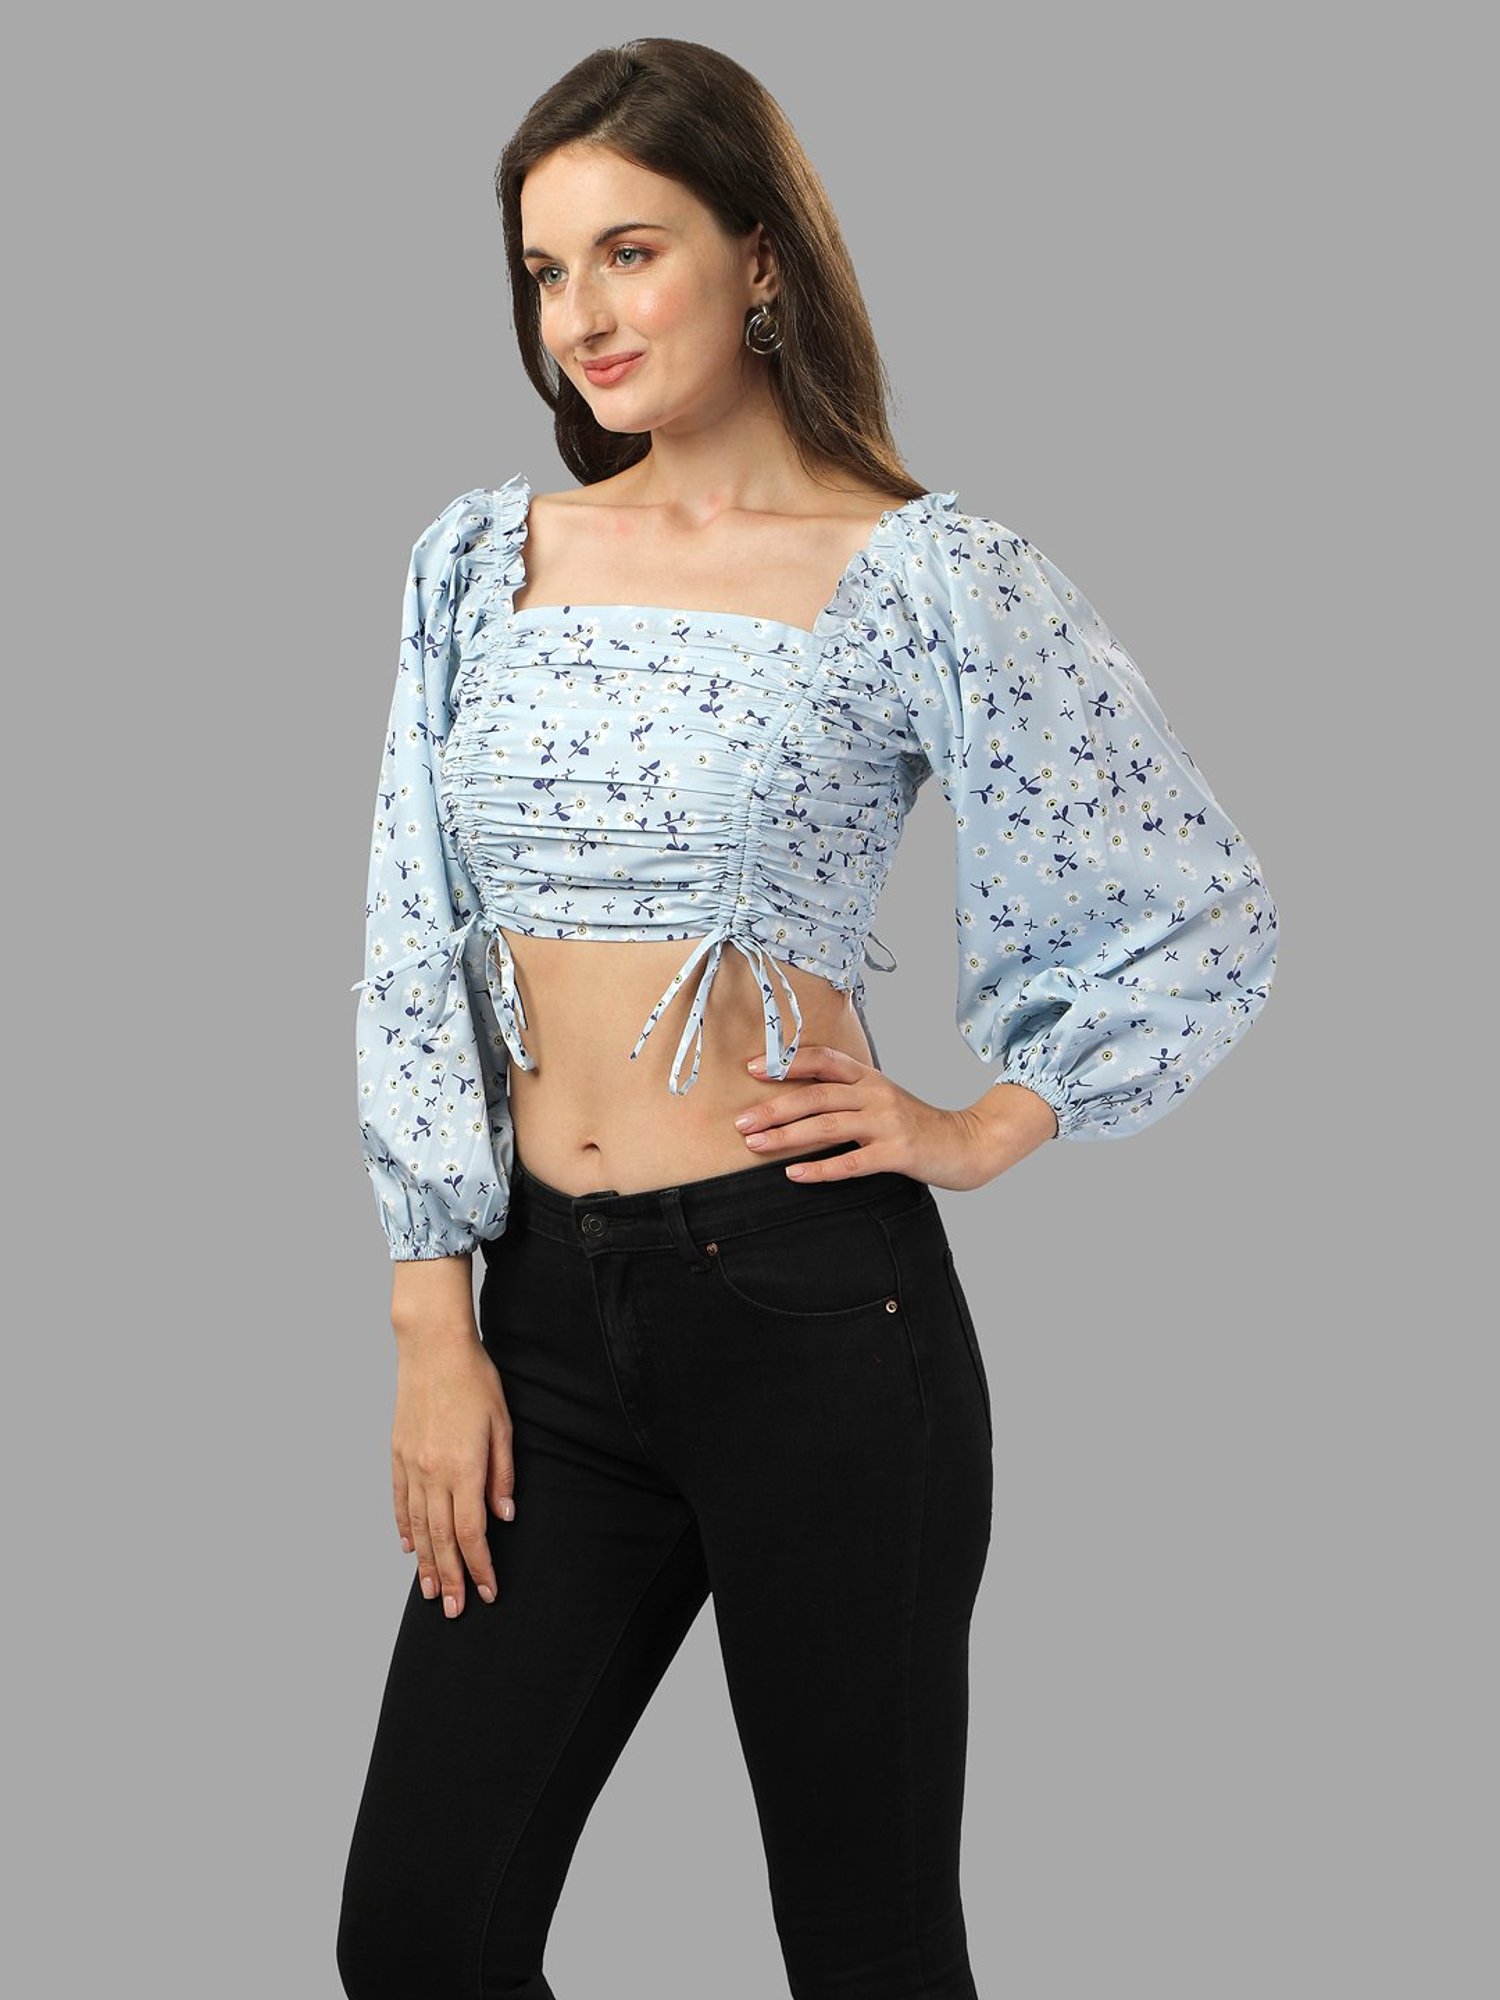 Myntra - Elevated and impeccably stylish tops for all day chic looks from  Chemistry! Check out their stunning collection on the #Myntra app now Look  up product code: 15059018, 17037396, 17037434, 15059076